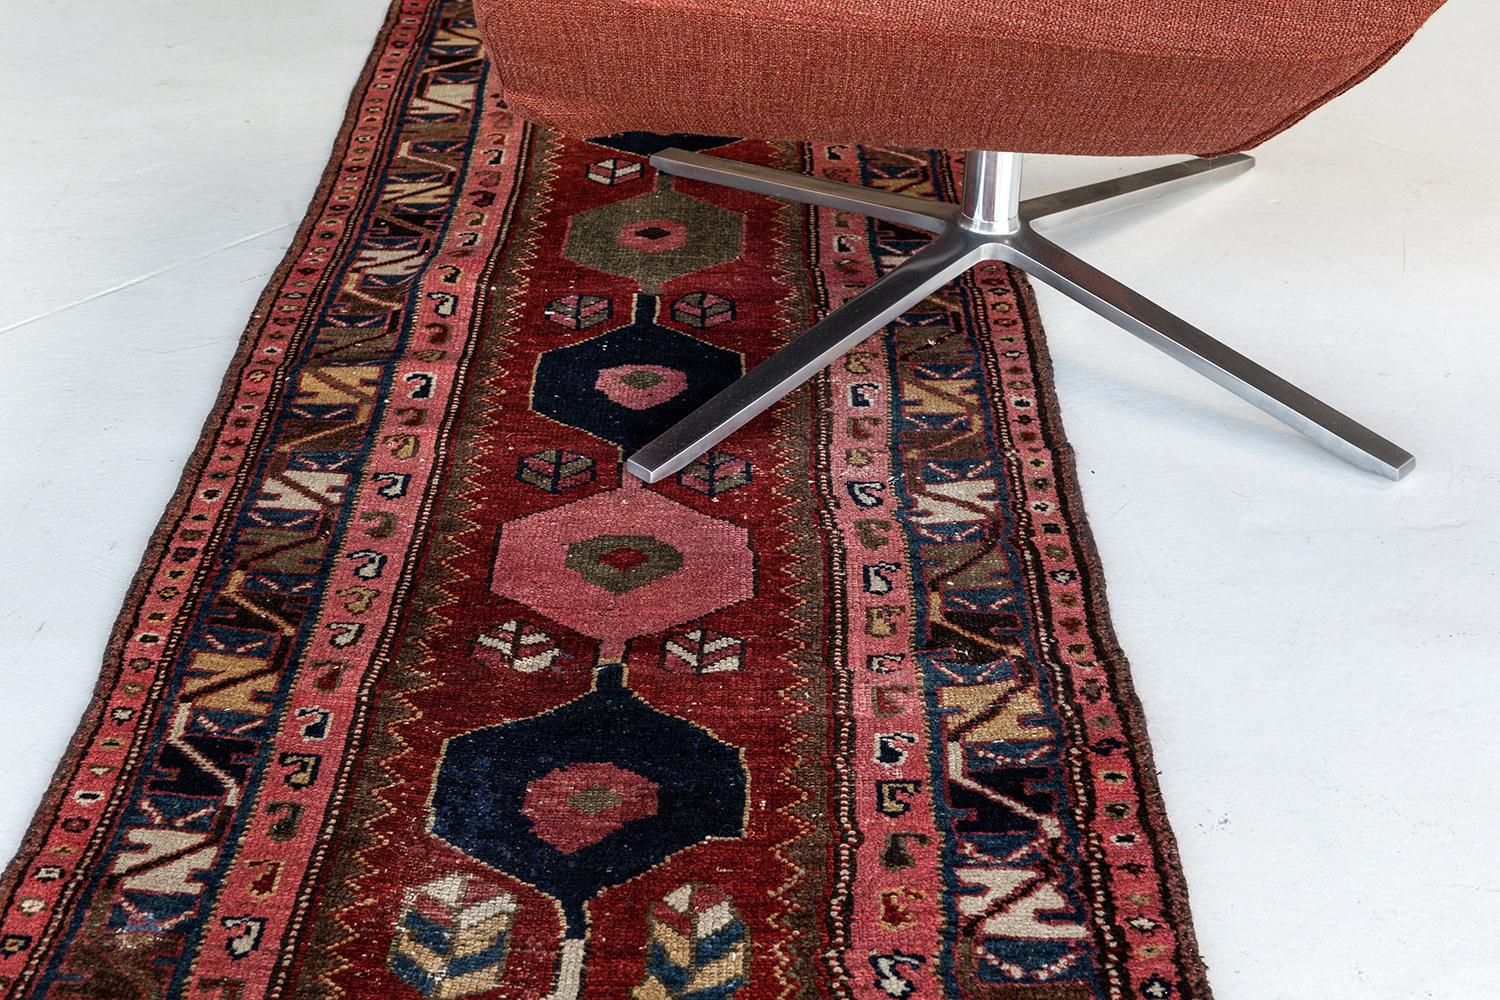 Exuding exquisite grace and majestic architectural design elements, this lovingly time-worn Antique Persian Serapi Runner can elegantly blend with modern, contemporary and traditional interiors. It features alternating series of hexagonal medallions